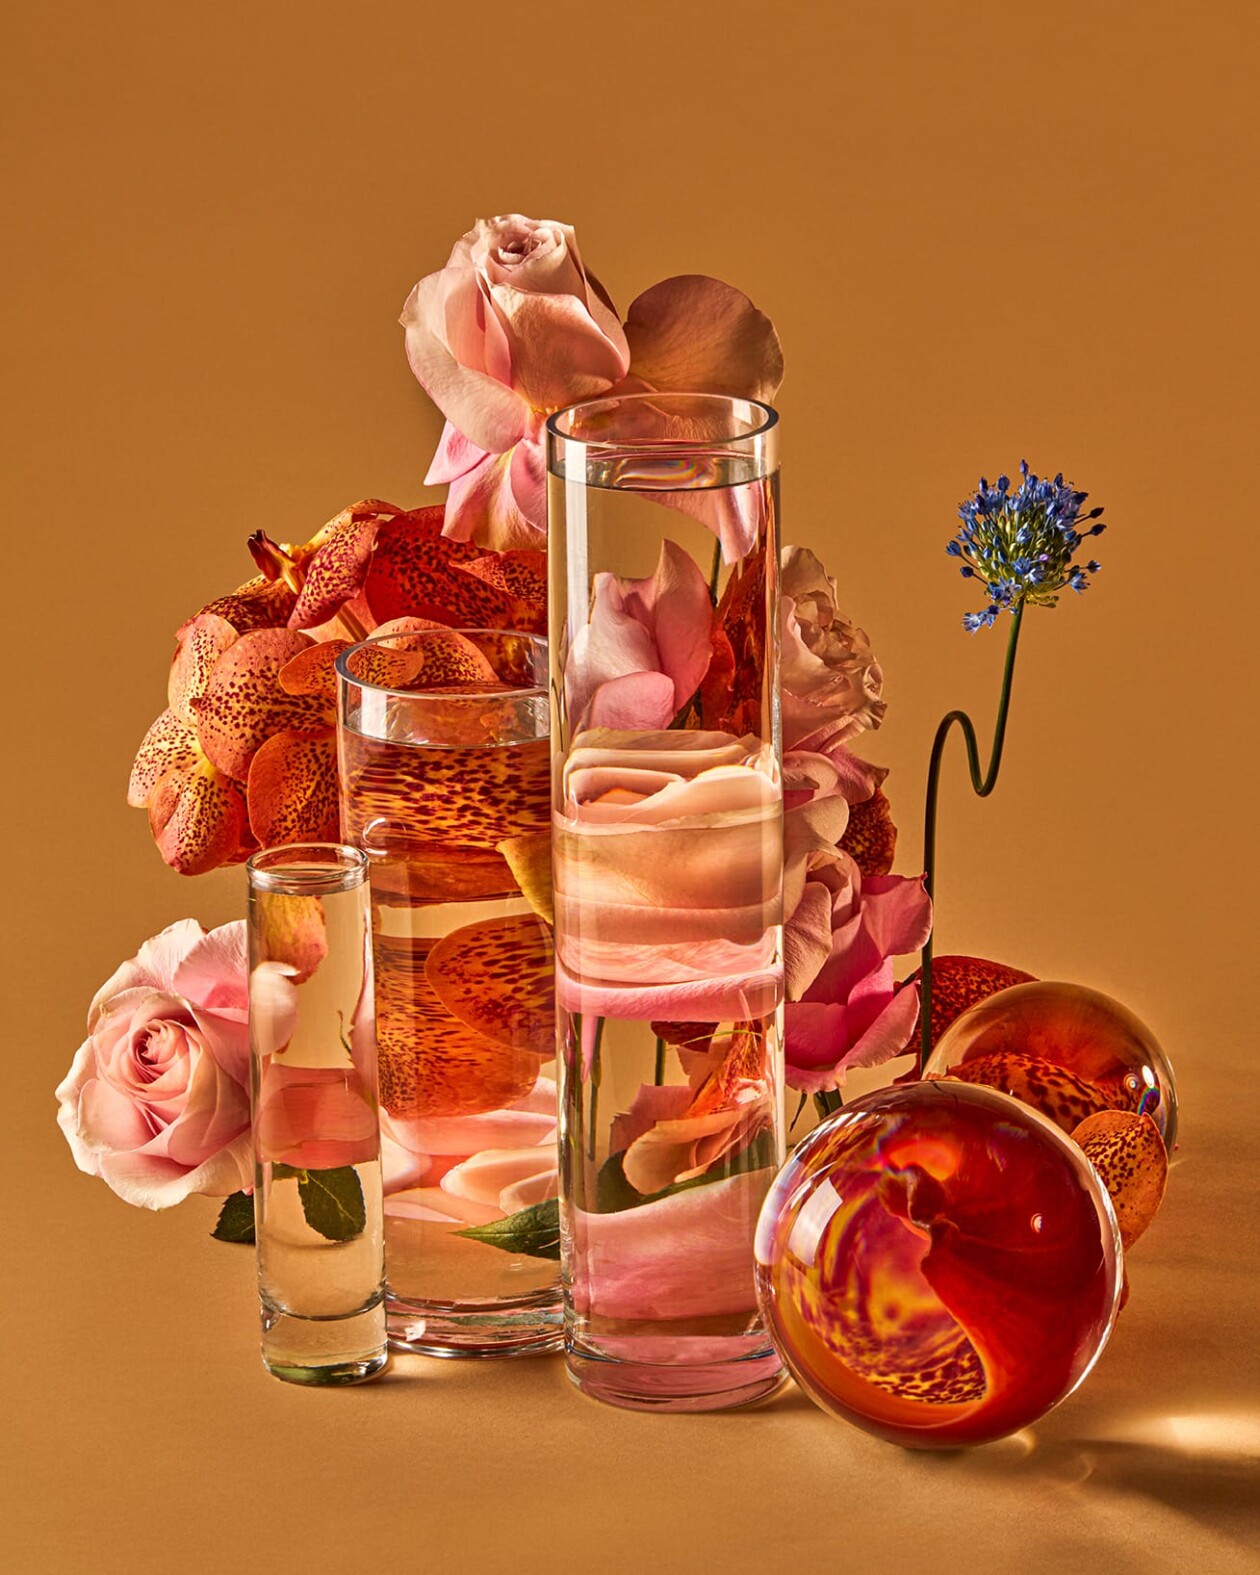 Perspective, Florals Distorted Through Water Vessels By Suzanne Saroff (1)